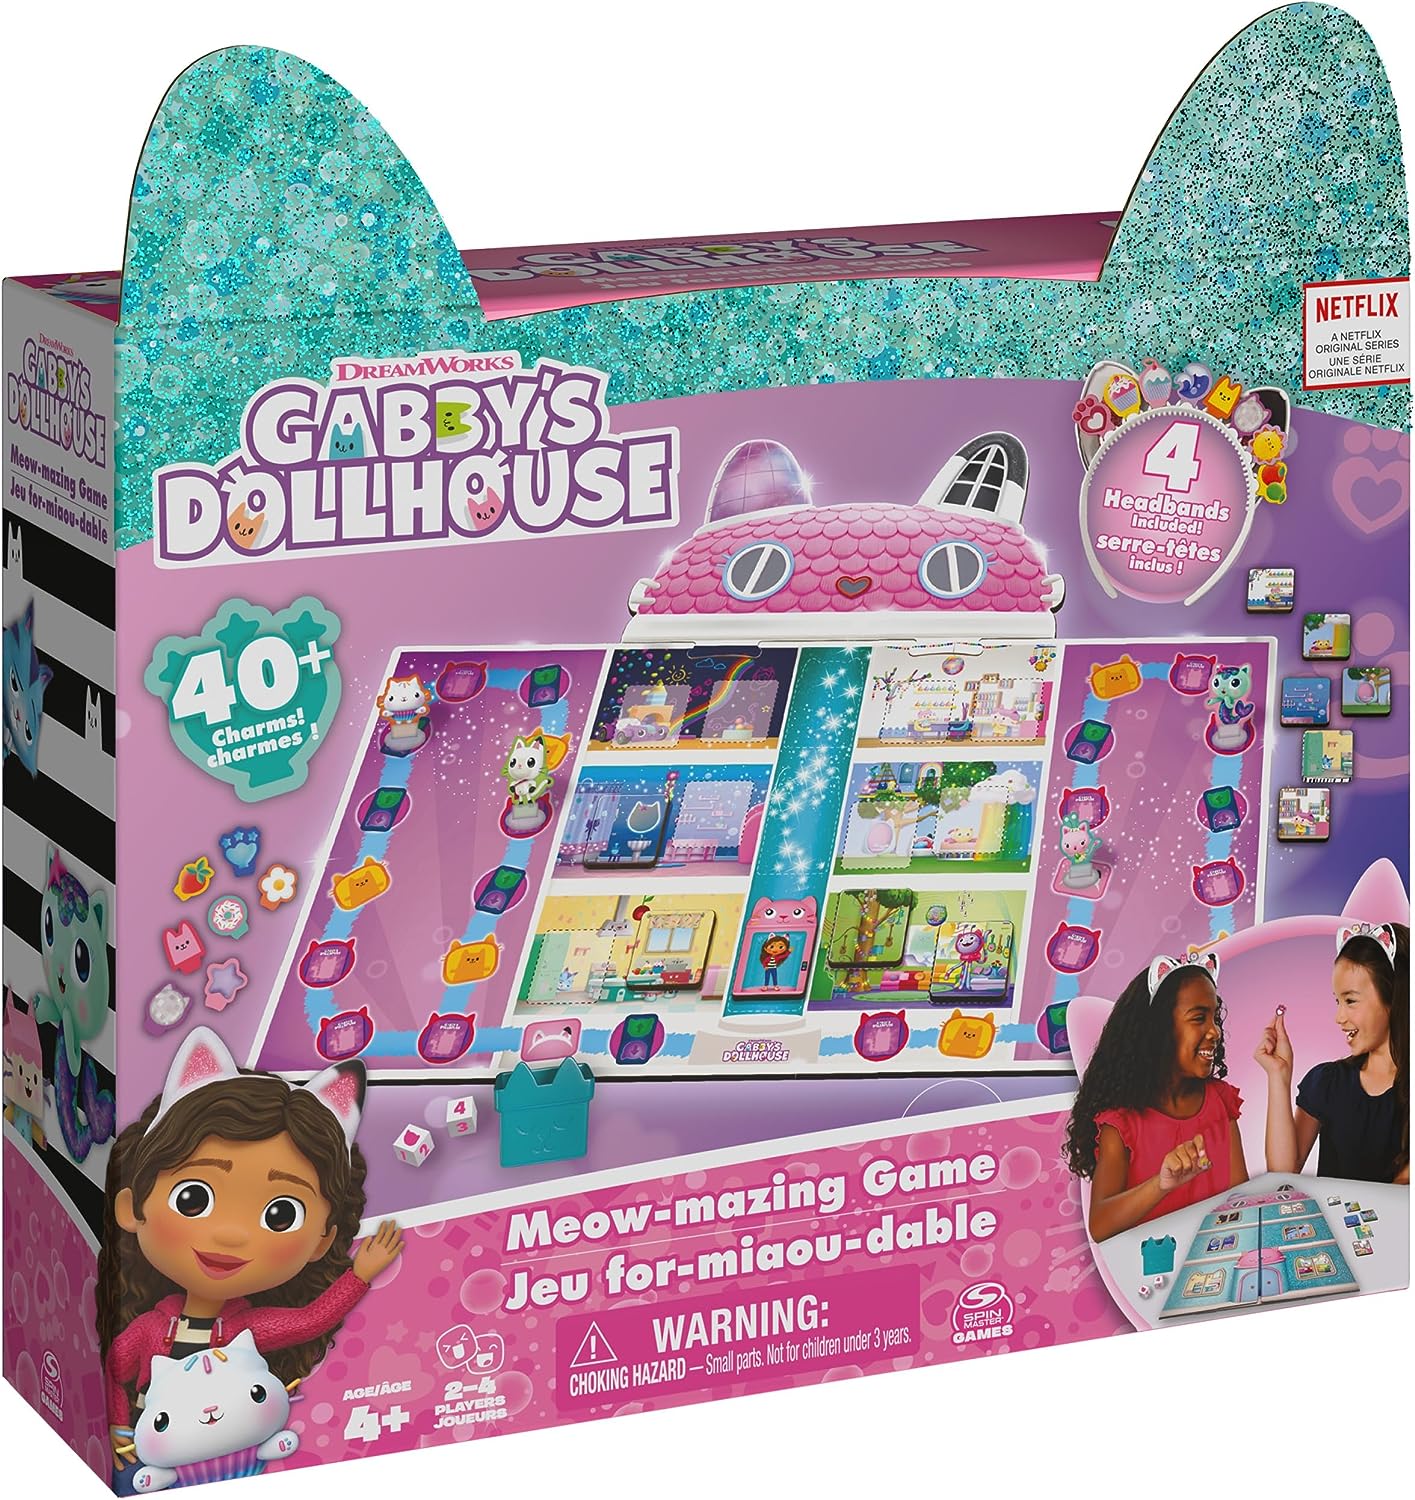 Gabby's Dollhouse Meow-mazing Party Game